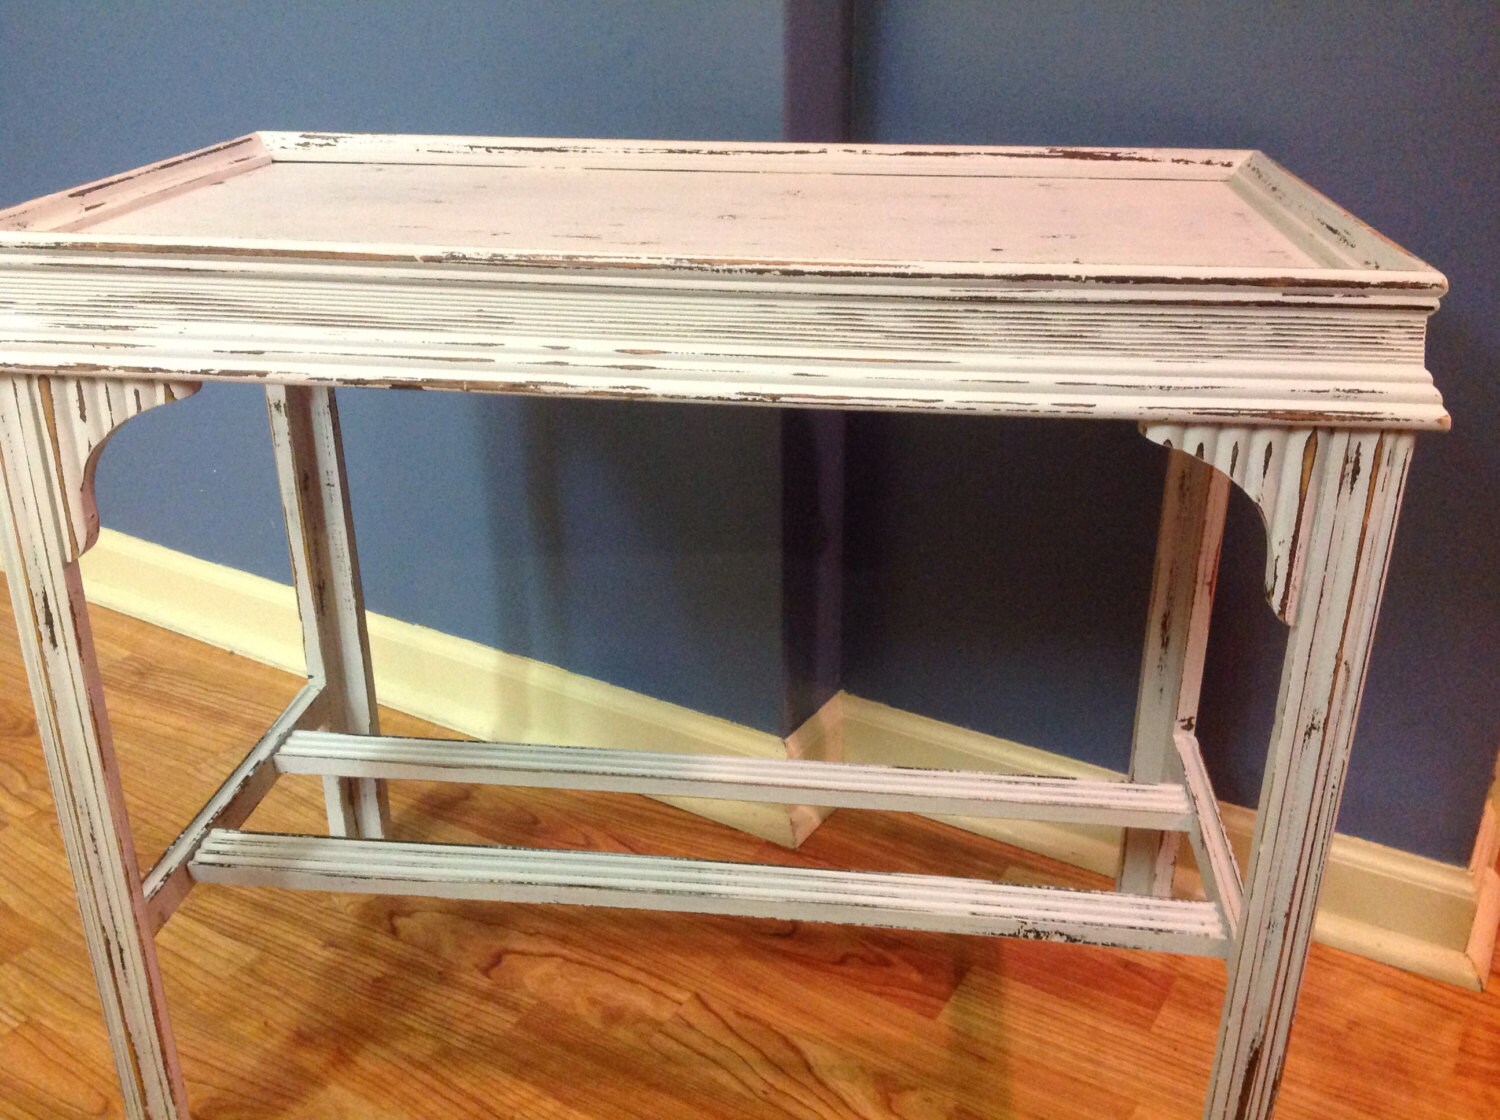 Vintage End Table Coffee Table Upcycled a Very Light Blue